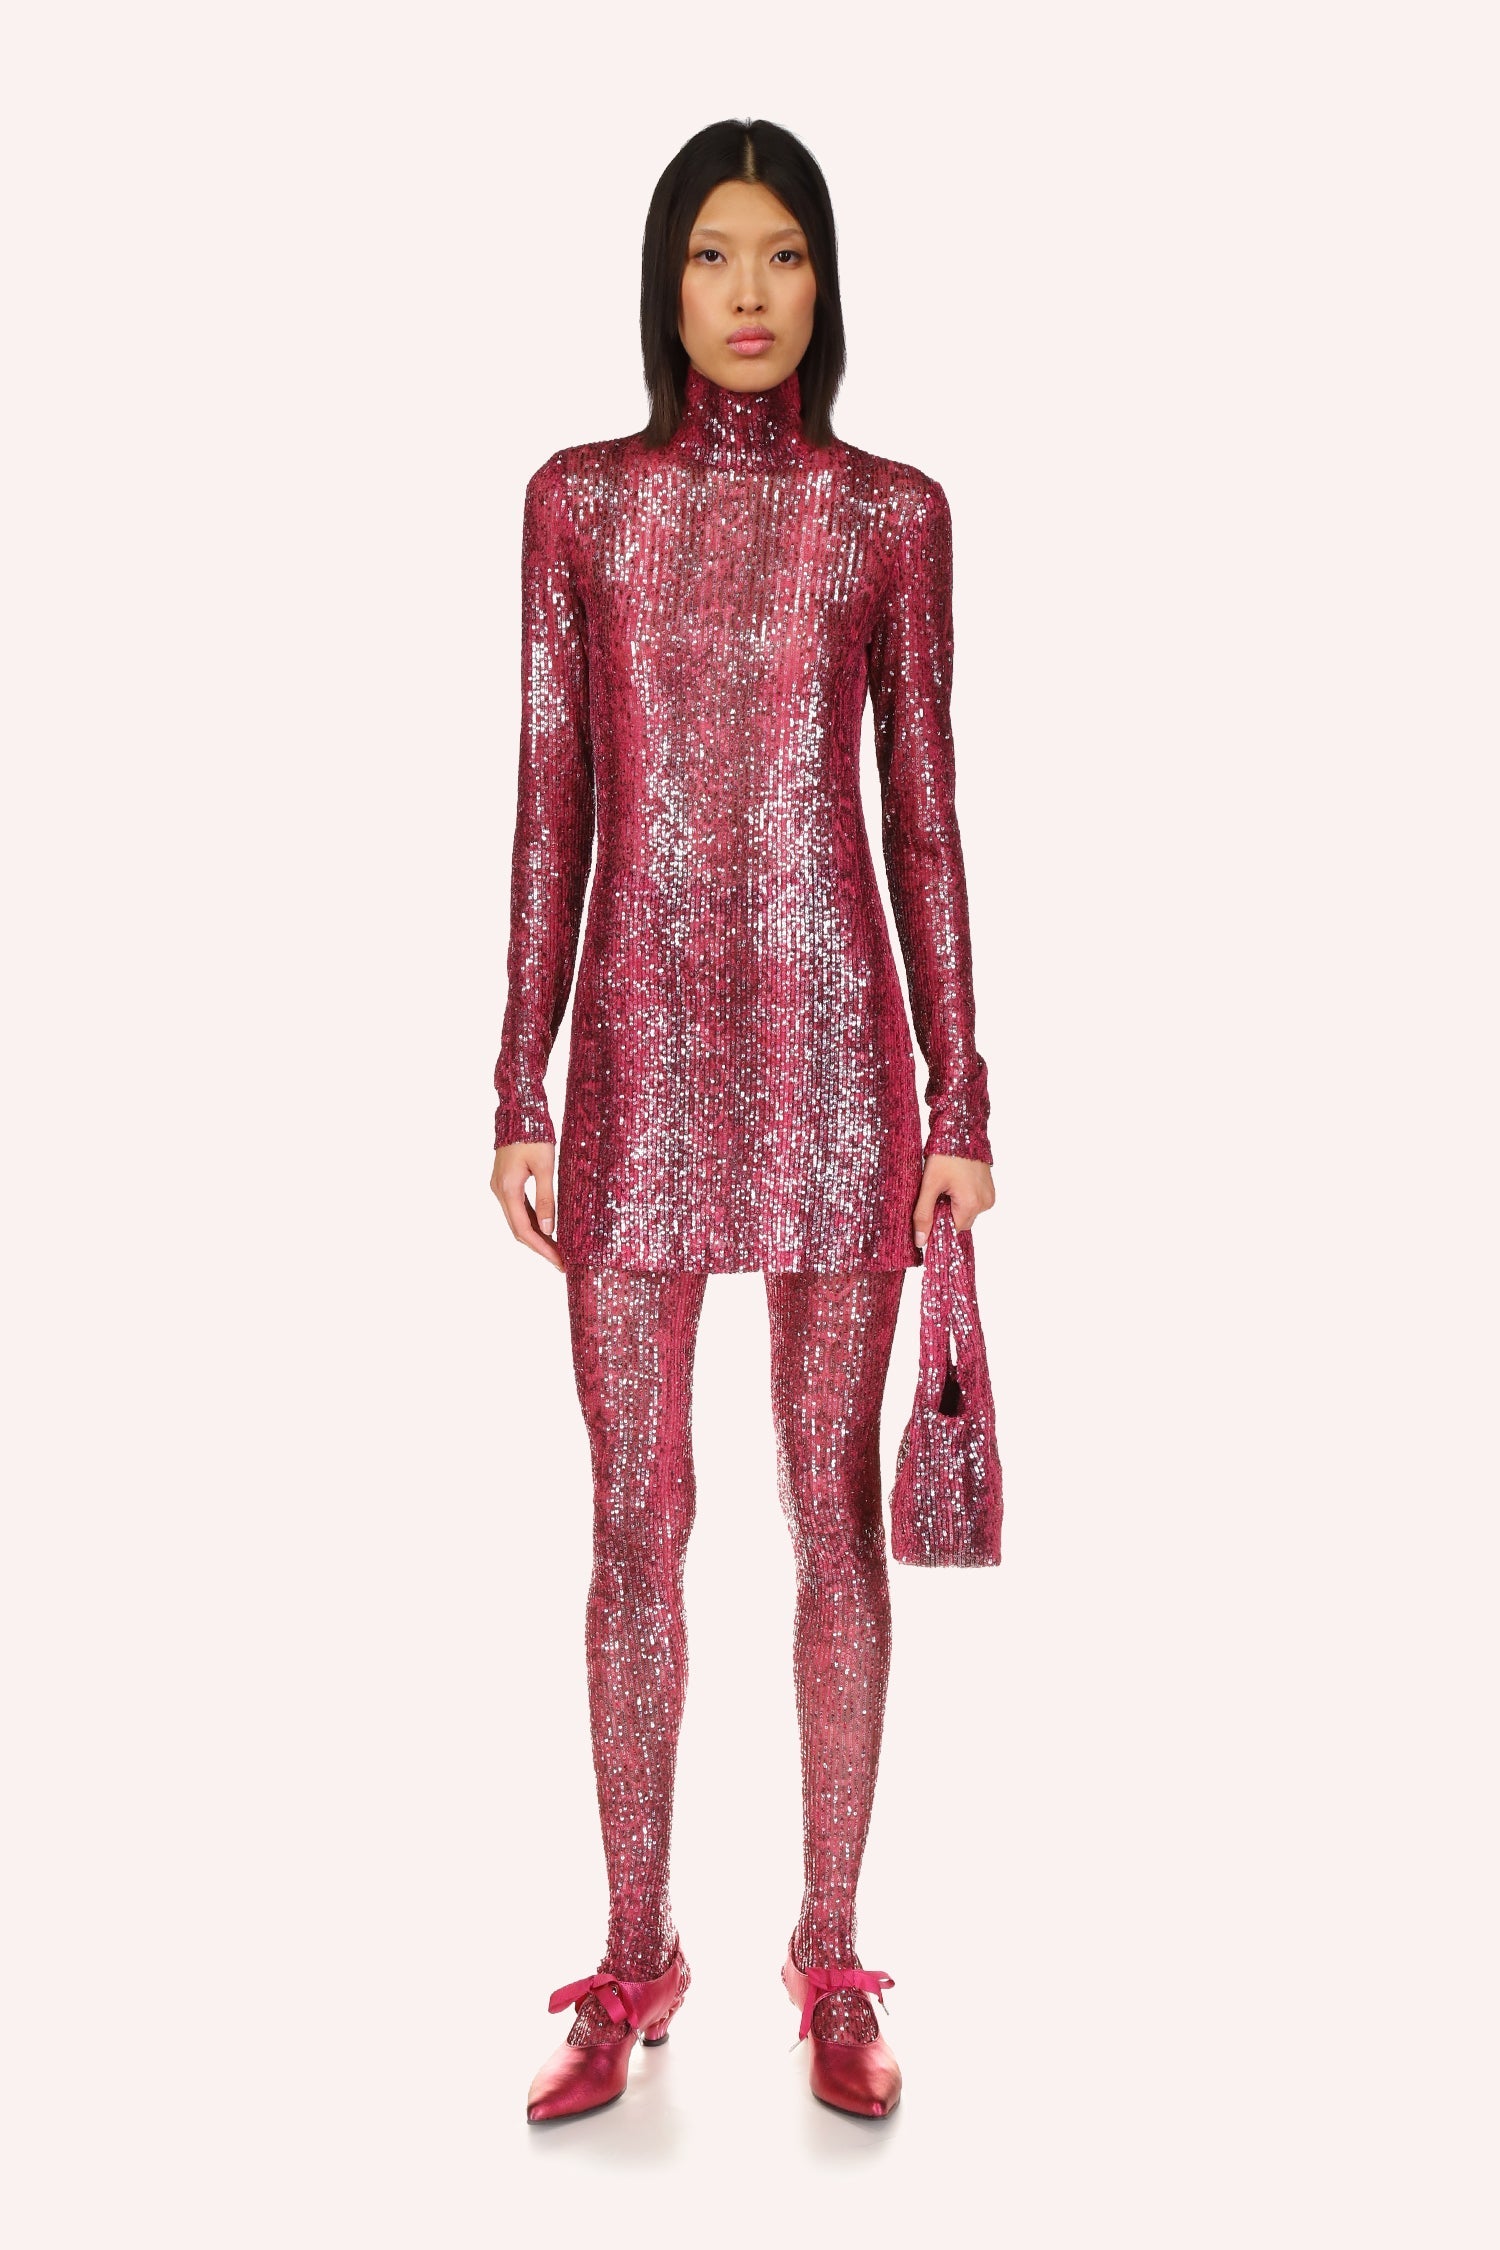 The Snakeskin Sequin Turtleneck is a shiny mini dress, featuring a ruby red color, long sleeves 